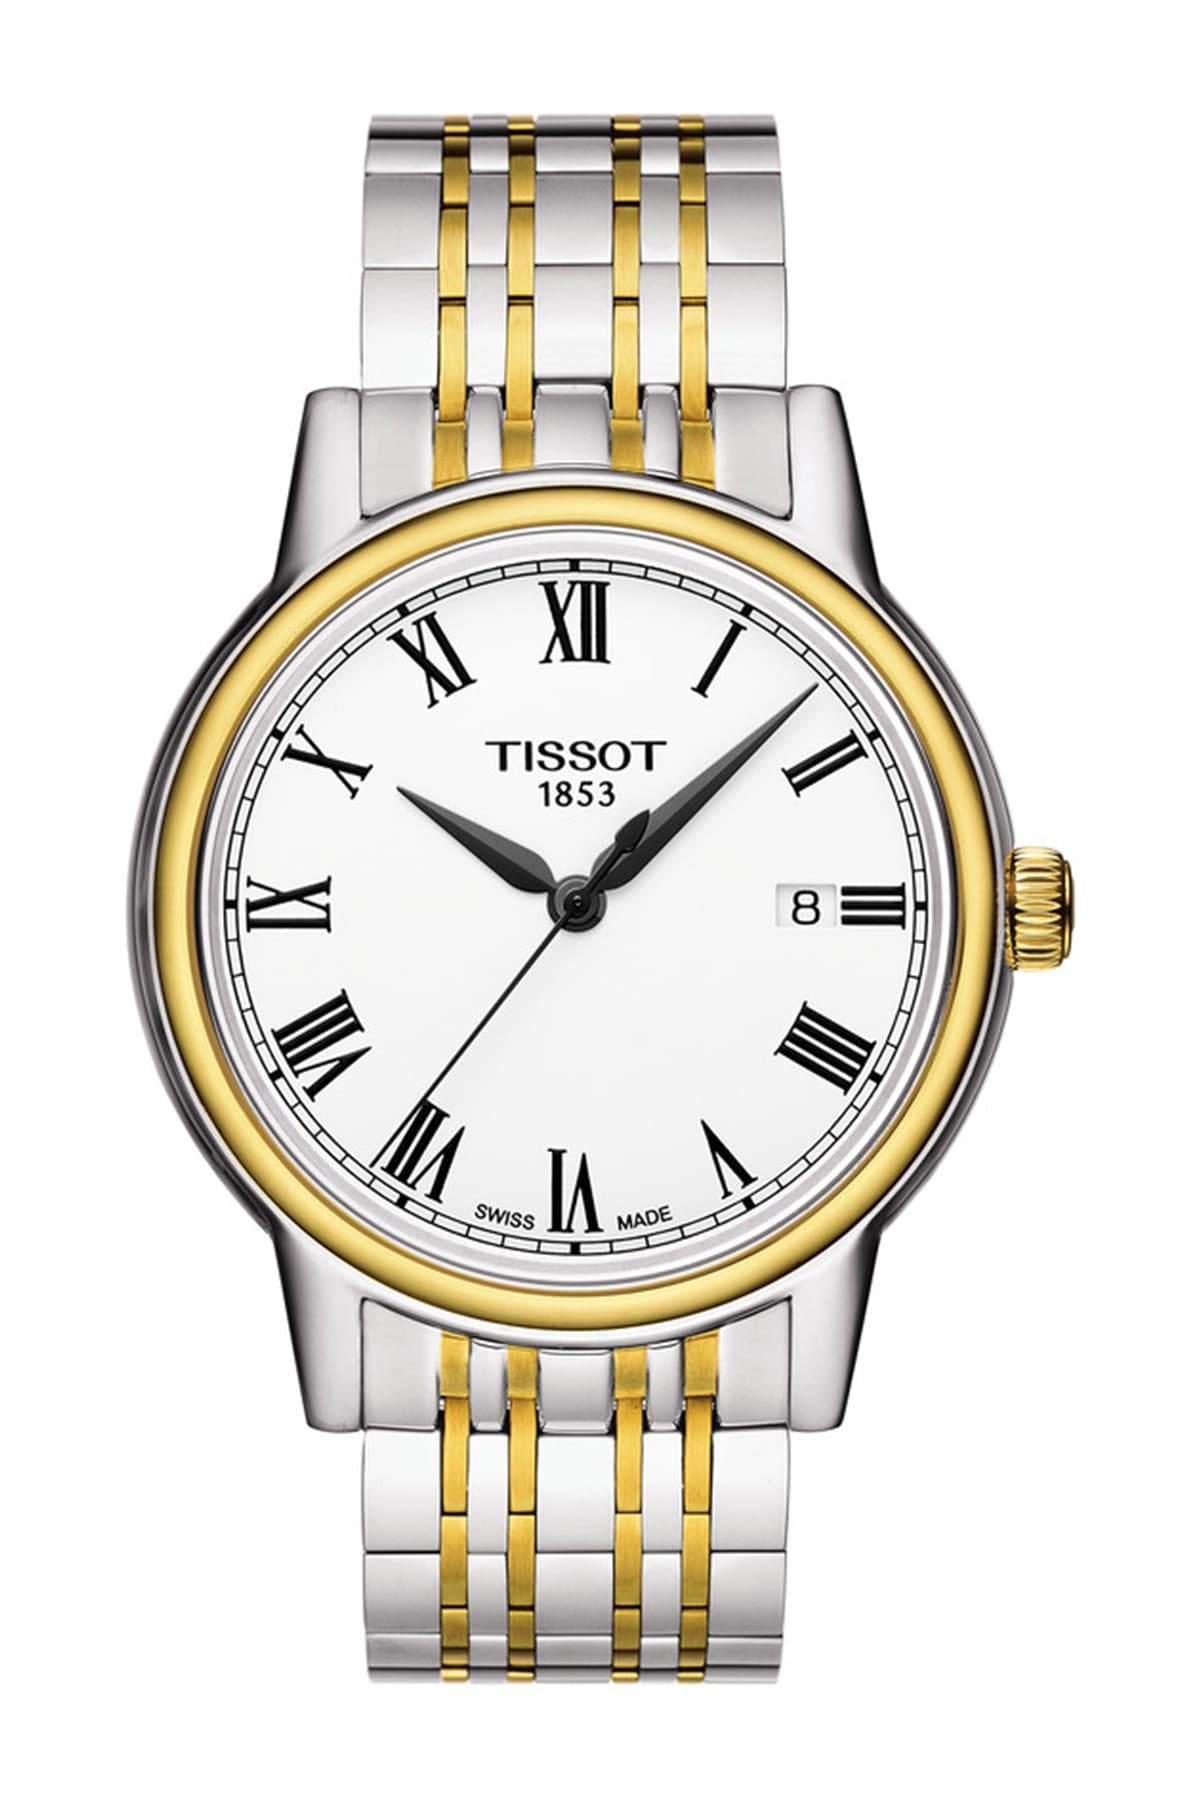 Tissot Swiss Made T-Classic Carson 2 Tone Gold Plated Men's Watch T0854102201300 - Diligence1International